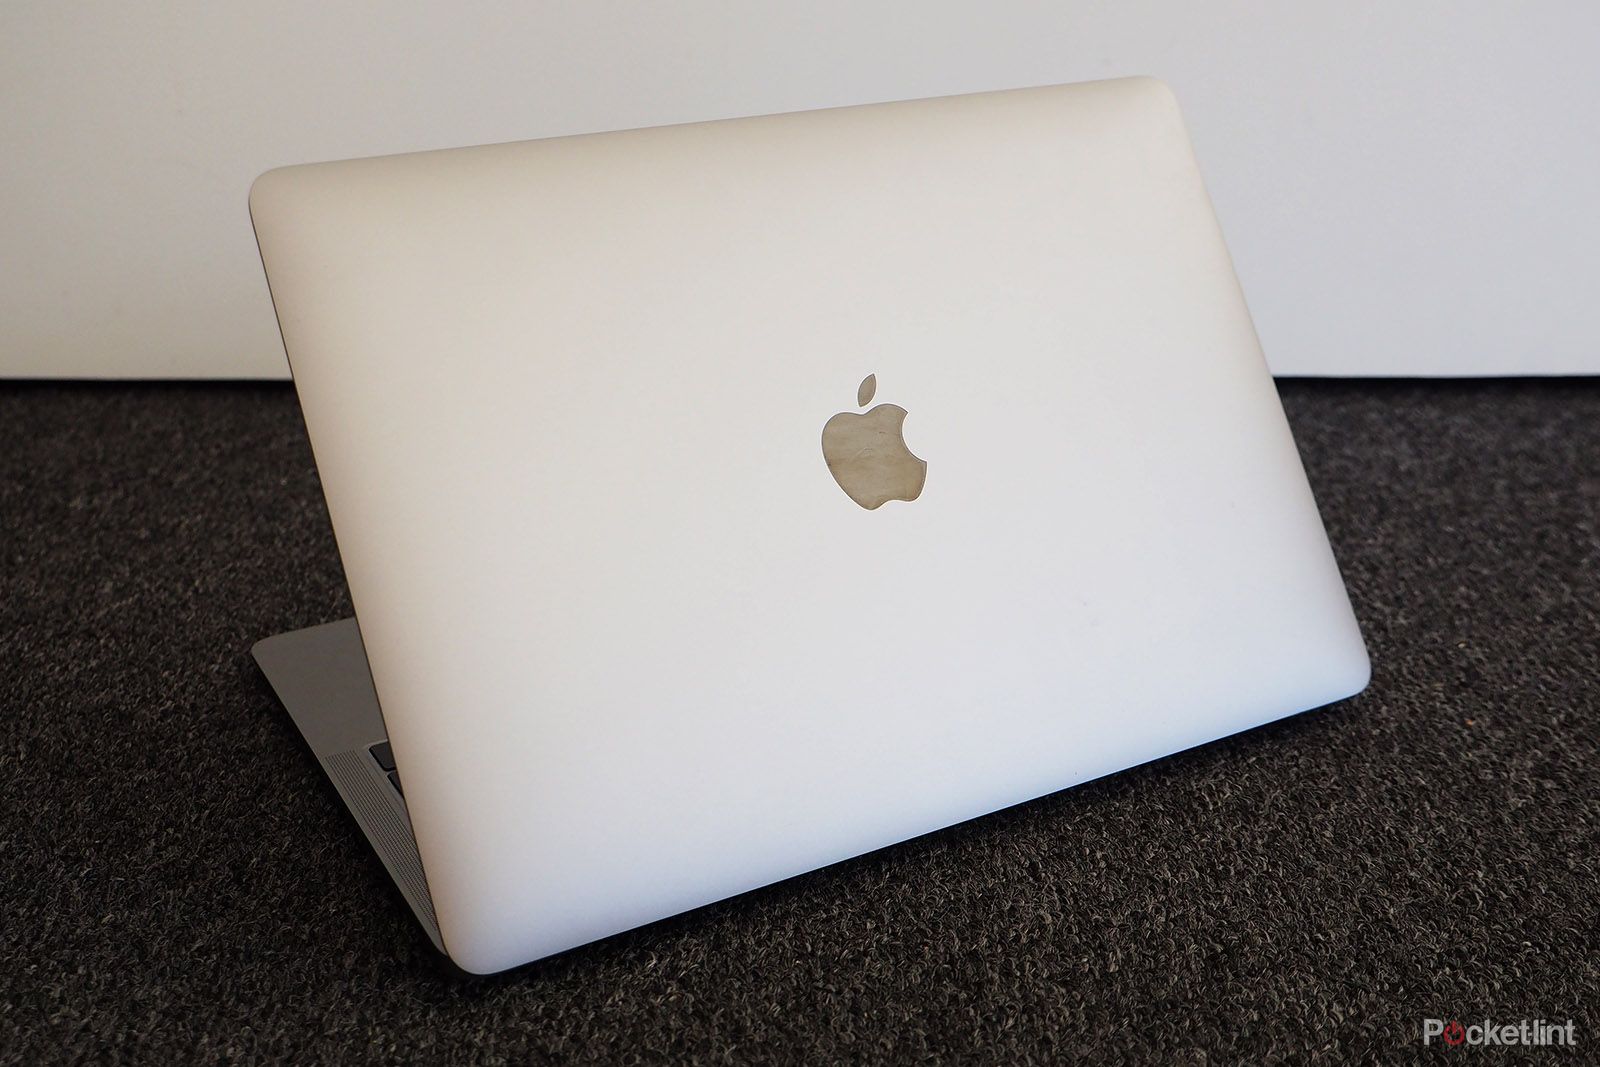 The 12-inch MacBook is dead - replaced by an upgraded and cheaper MacBook Air image 1